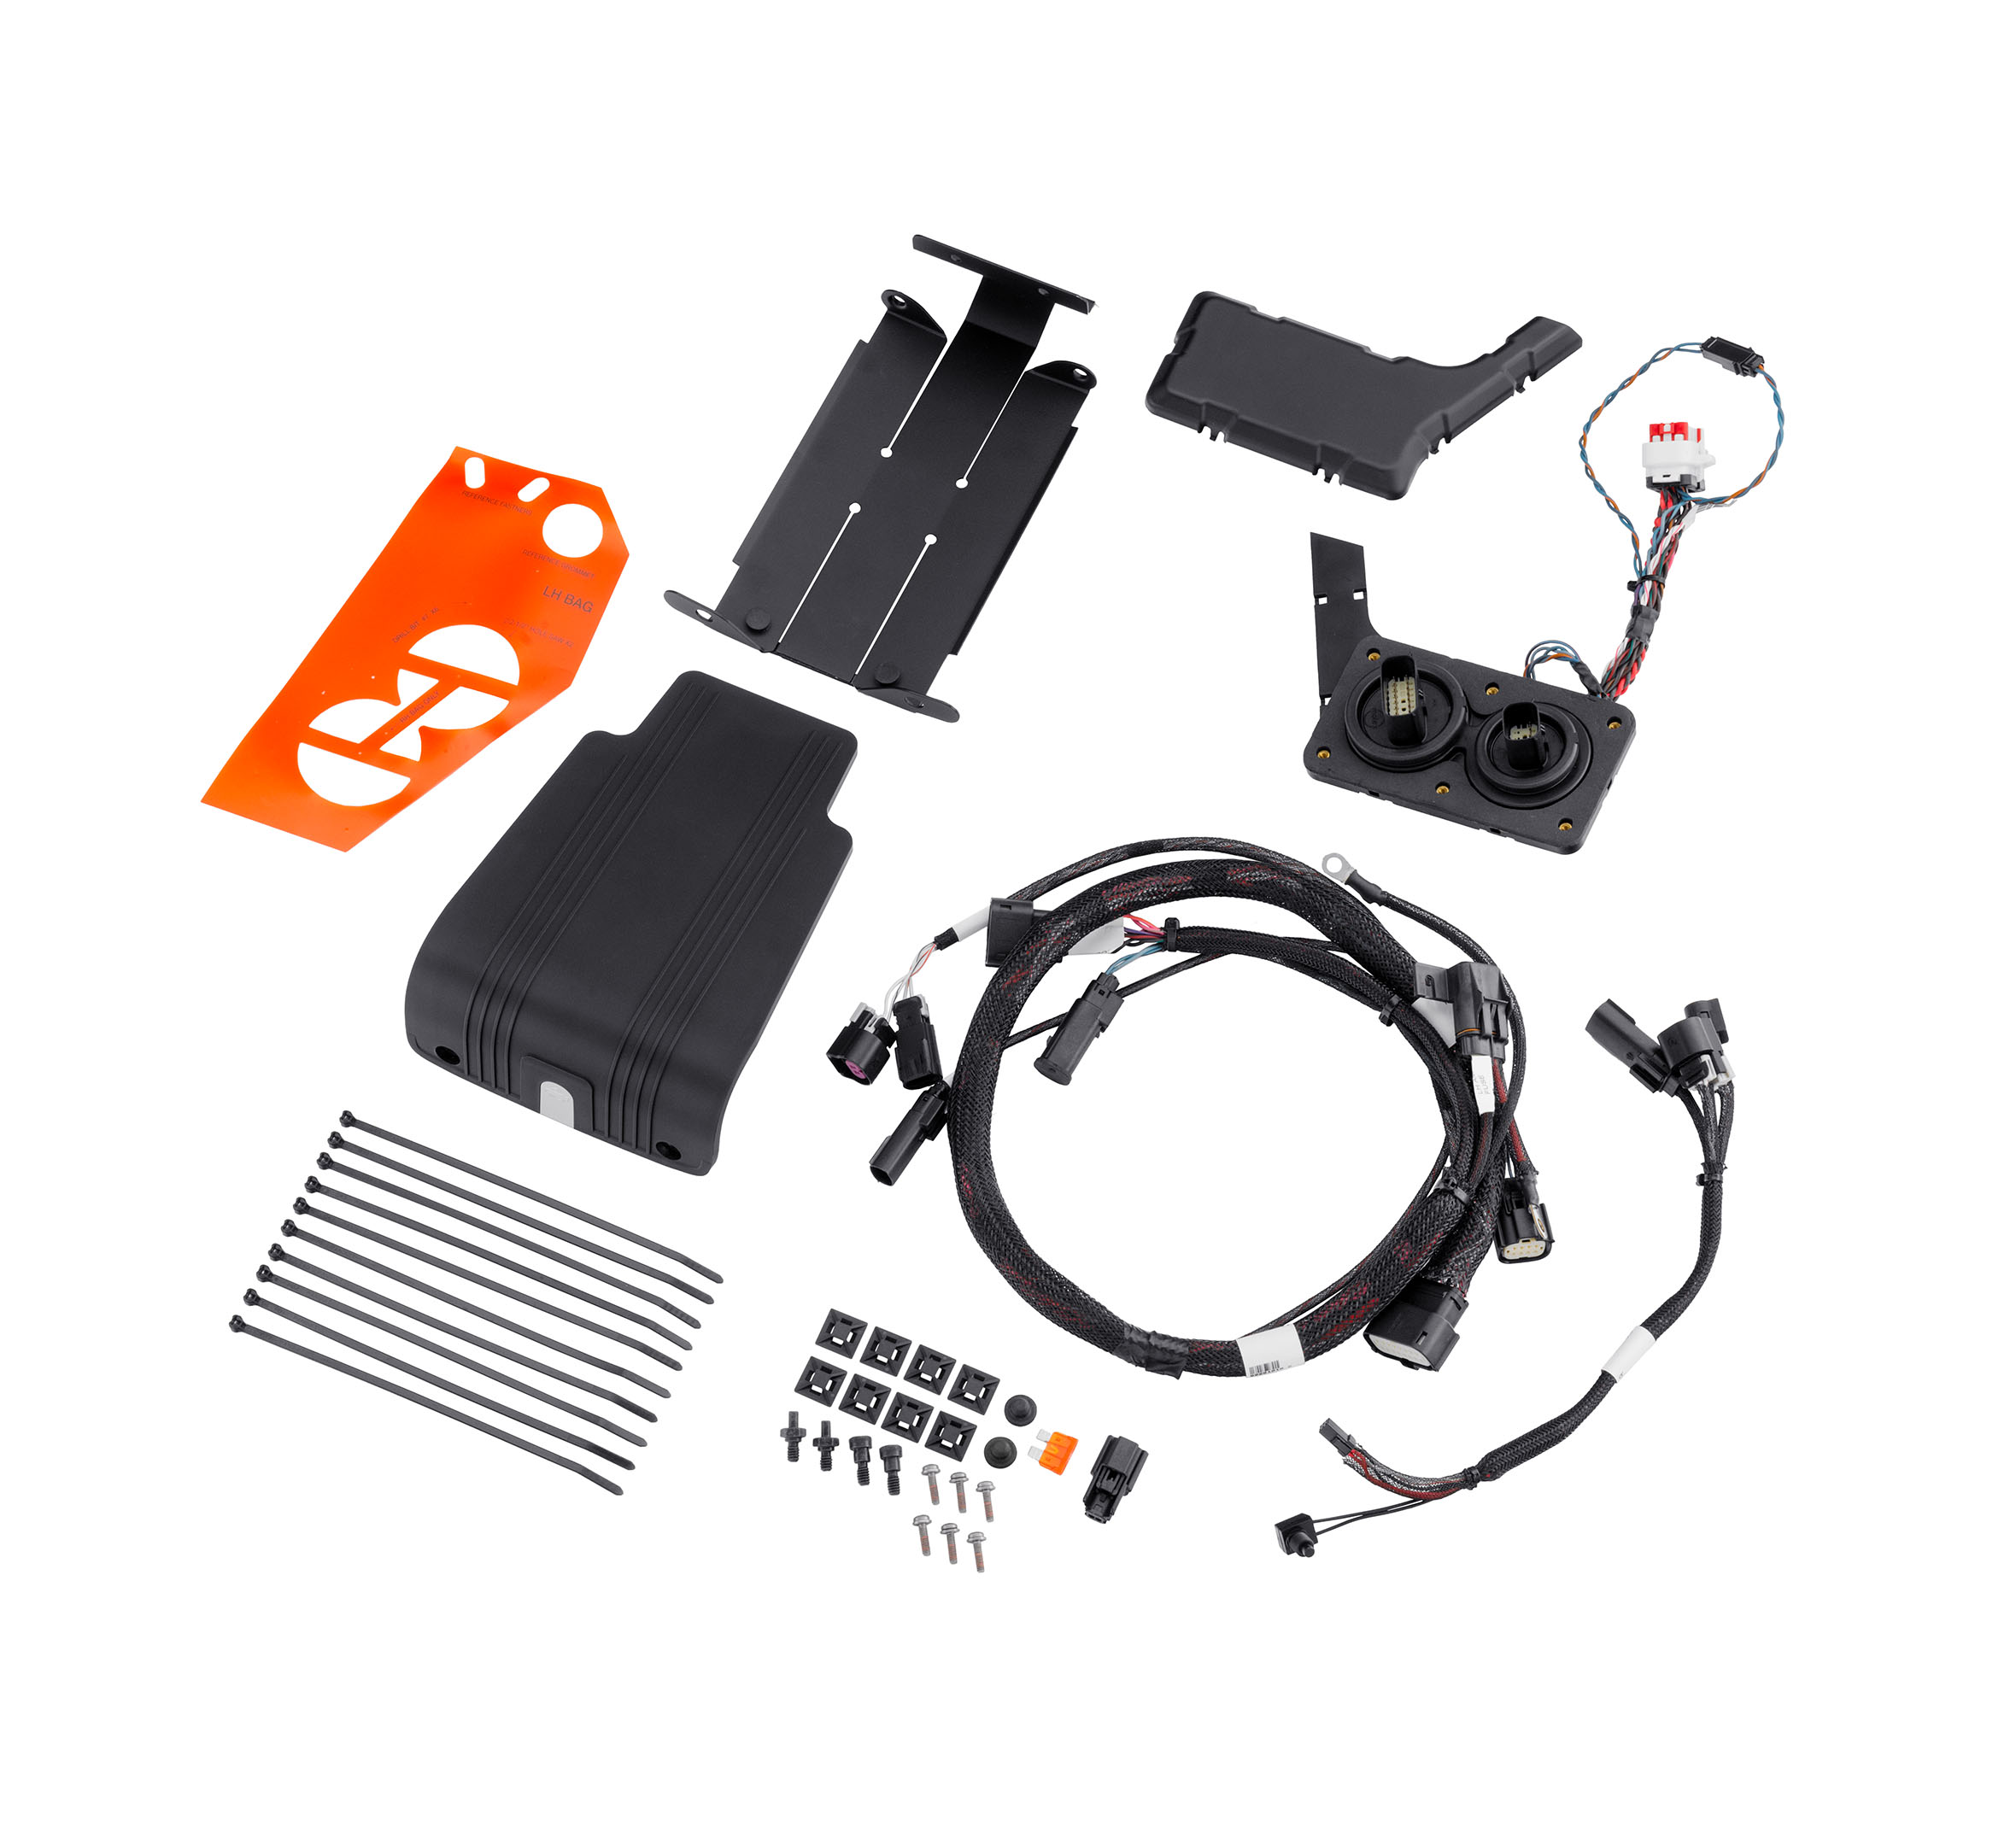 Oxygen Free Copper Motorcycle Amplifier Amp Wiring Kit Fits Harley Rockford OFC 